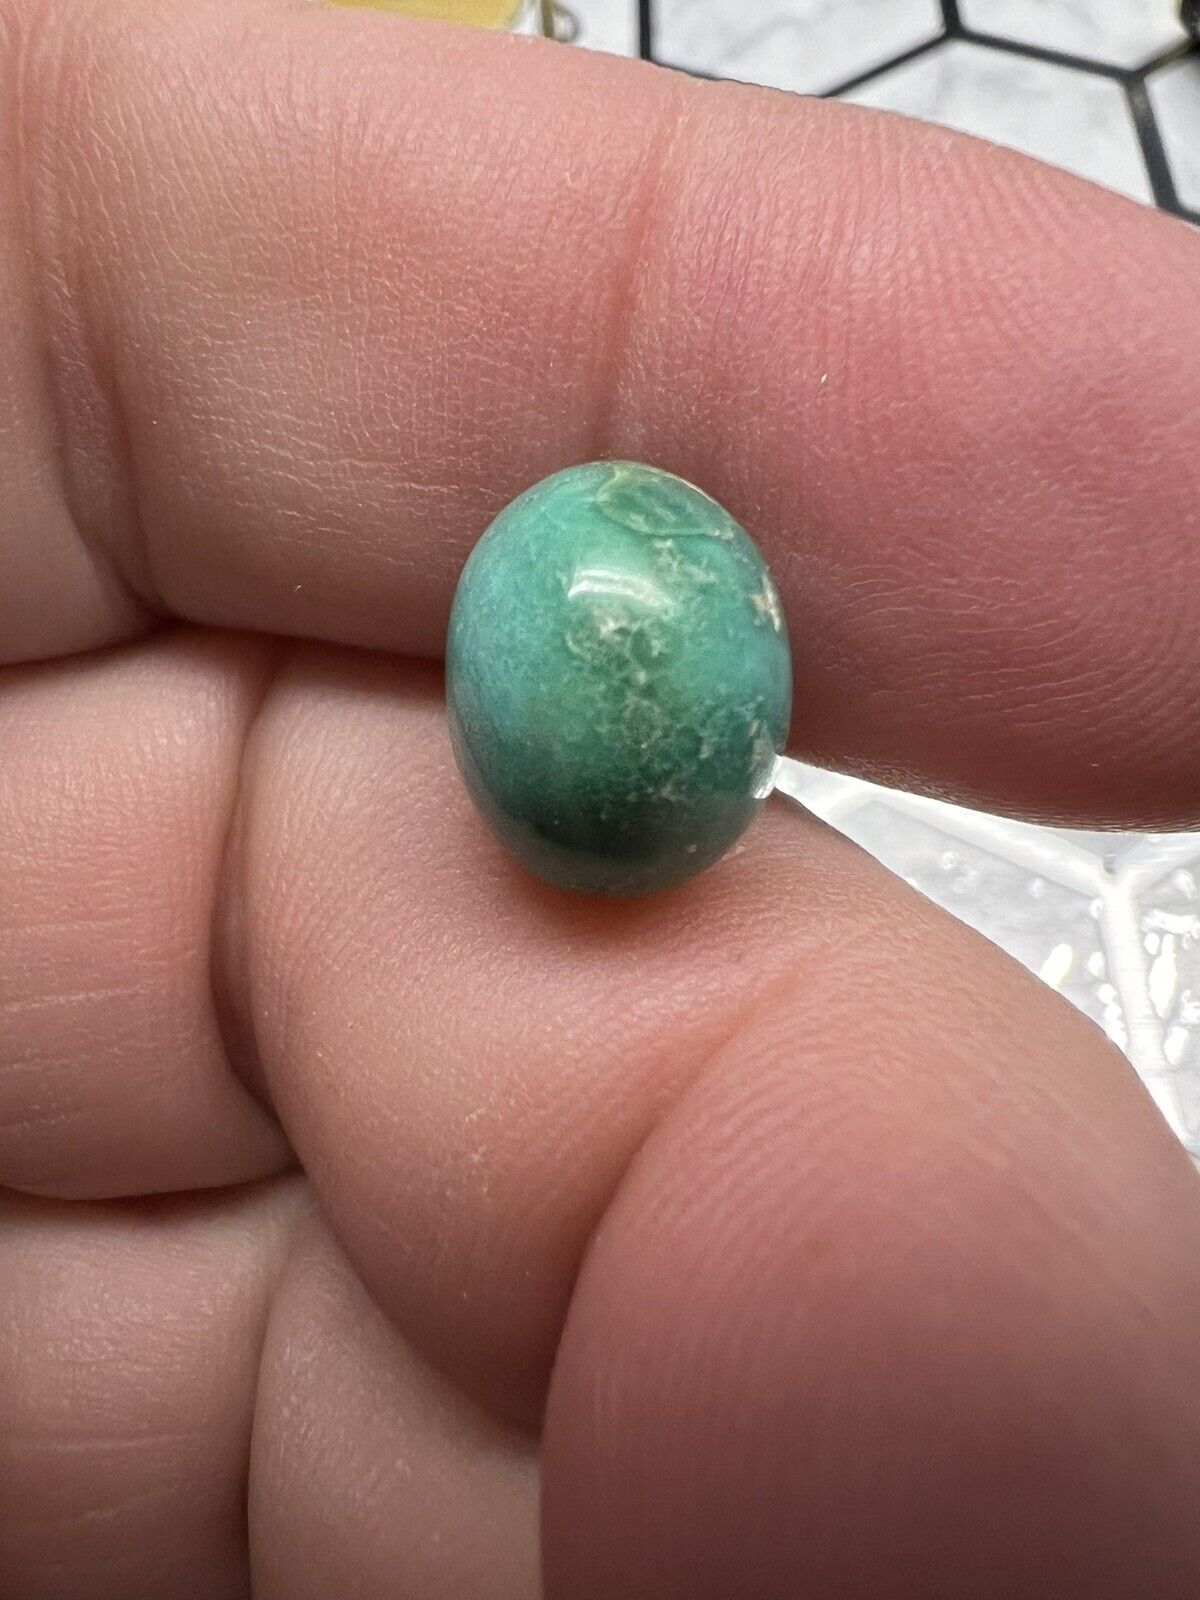 Stunning antique Chinese Chrysoprase bead 12.1 x 9.4 mm valuable collectible